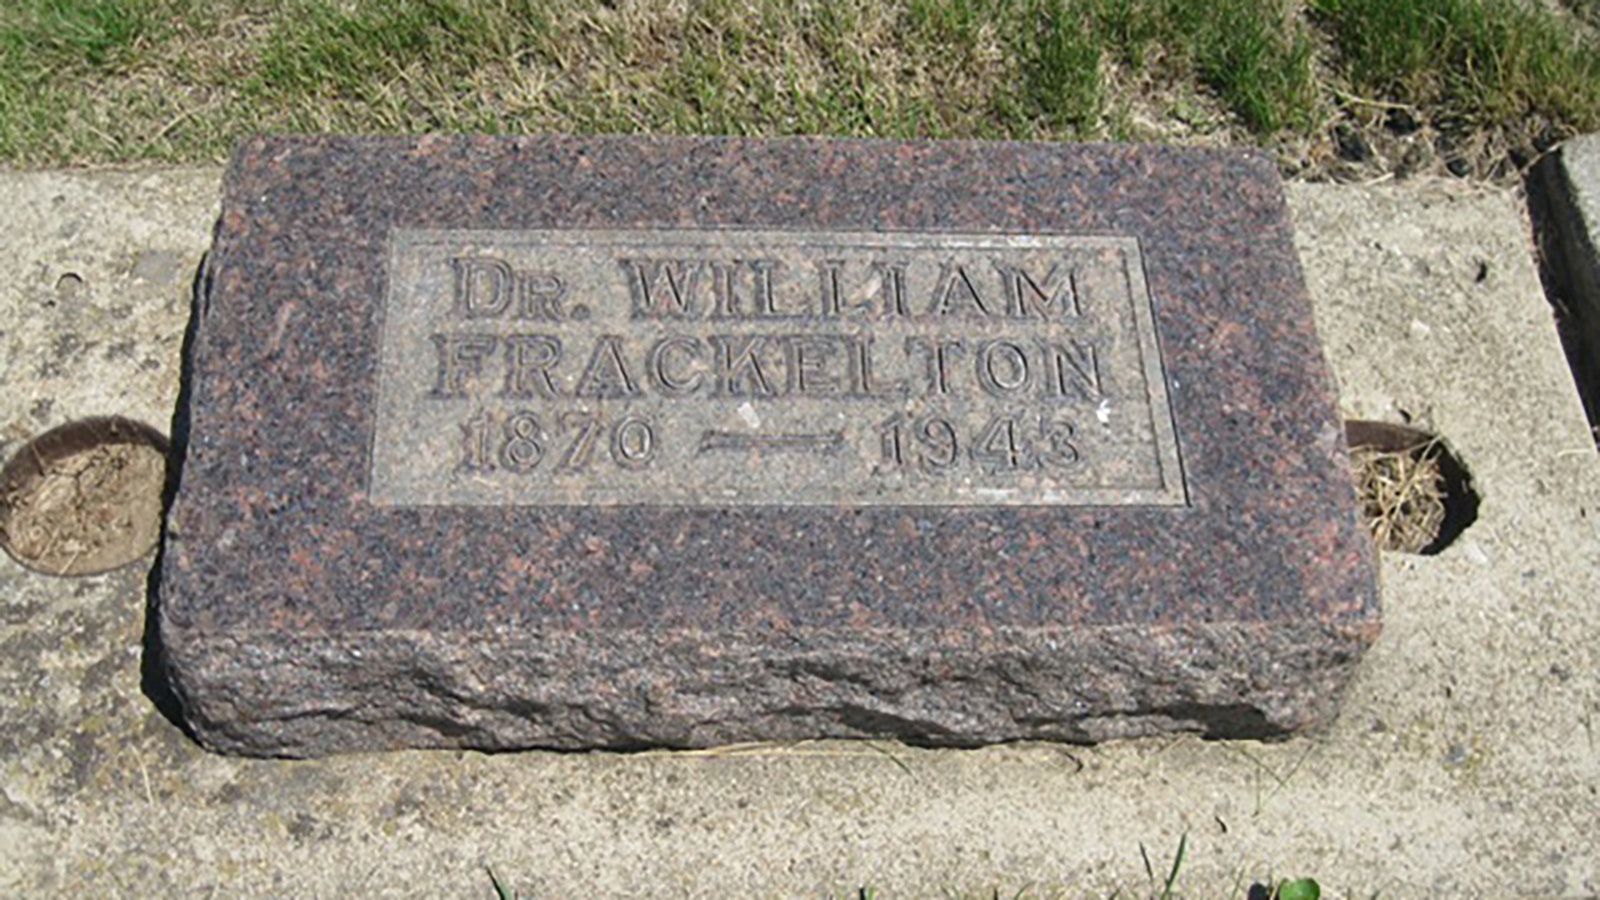 Dr. William Frackelton is buried in Sheridan Municipal Cemetery.